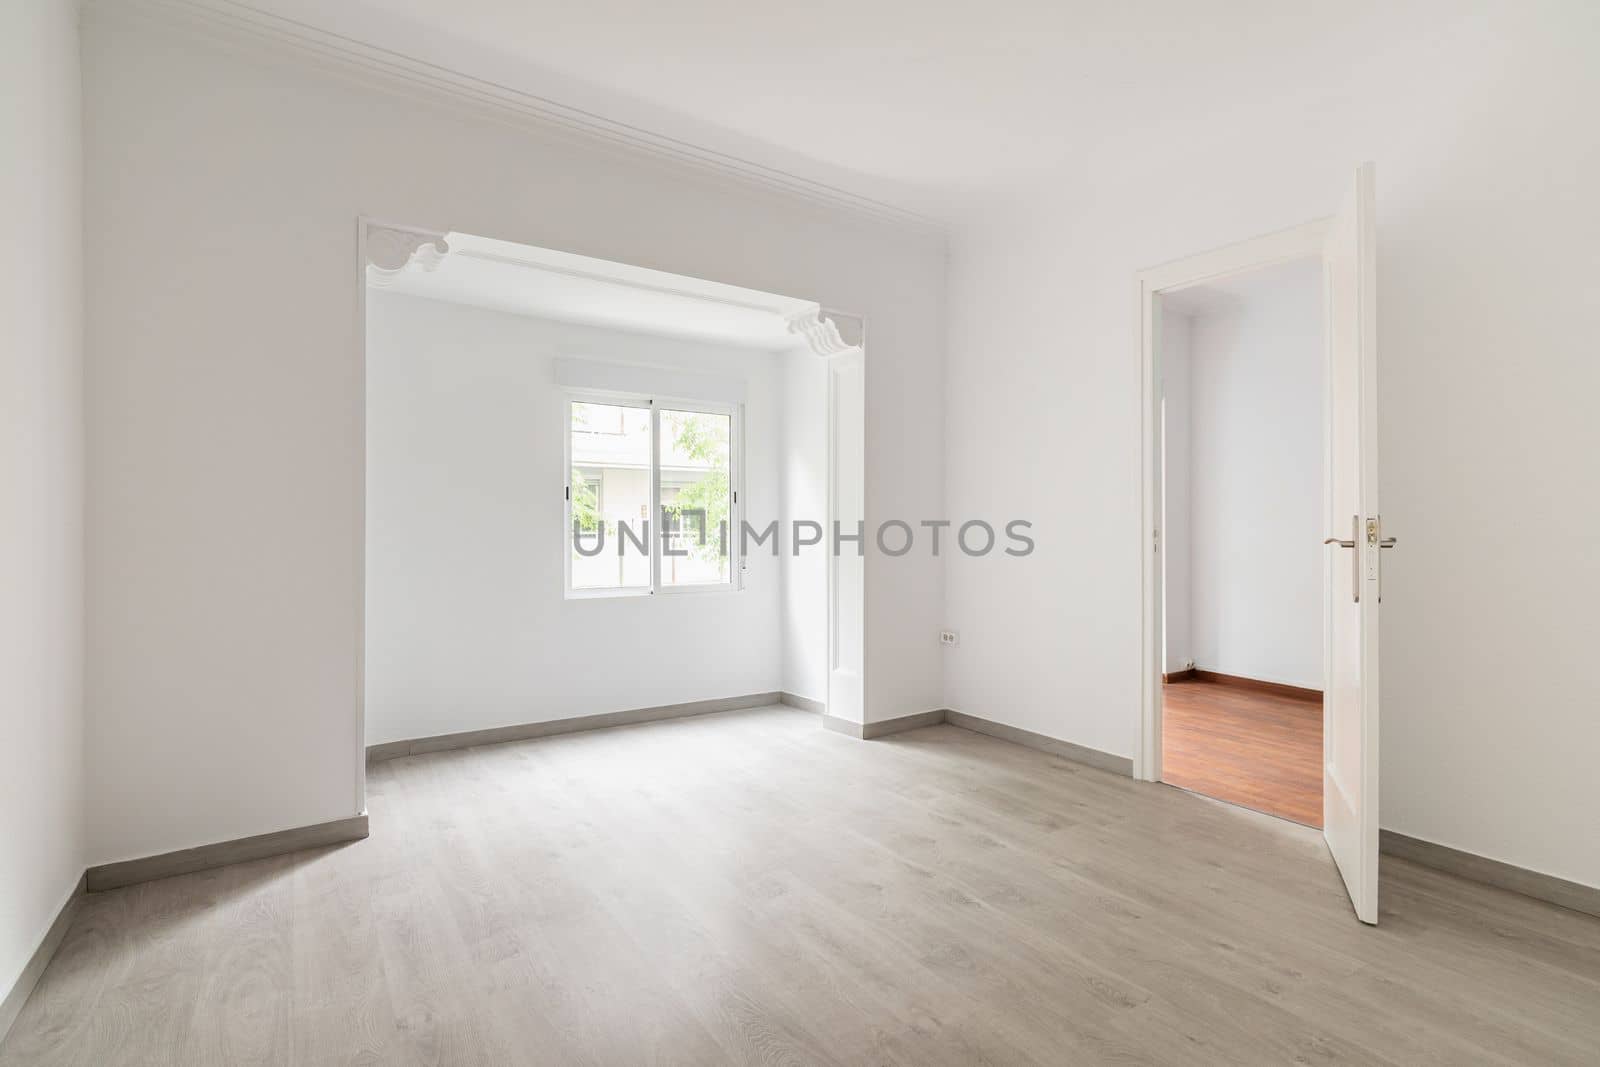 An empty spacious room, sunlight penetrates through the window during daylight hours. On floor there is wooden parquet in gray color. In open doorway is corridor to the rest of the apartment